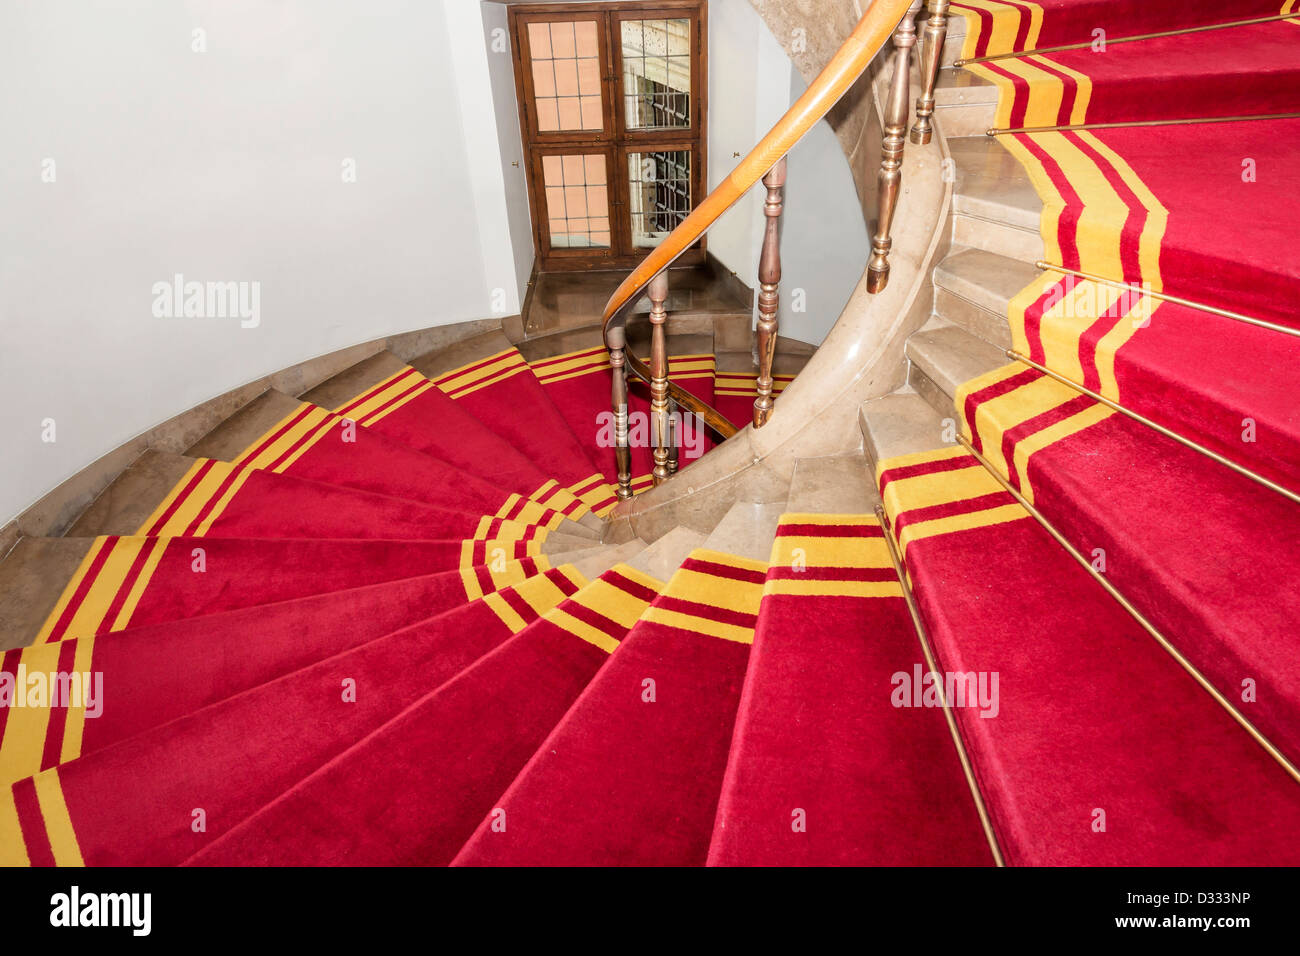 Stairwell in the Polish palace. Royal castle in Warsaw. Stock Photo